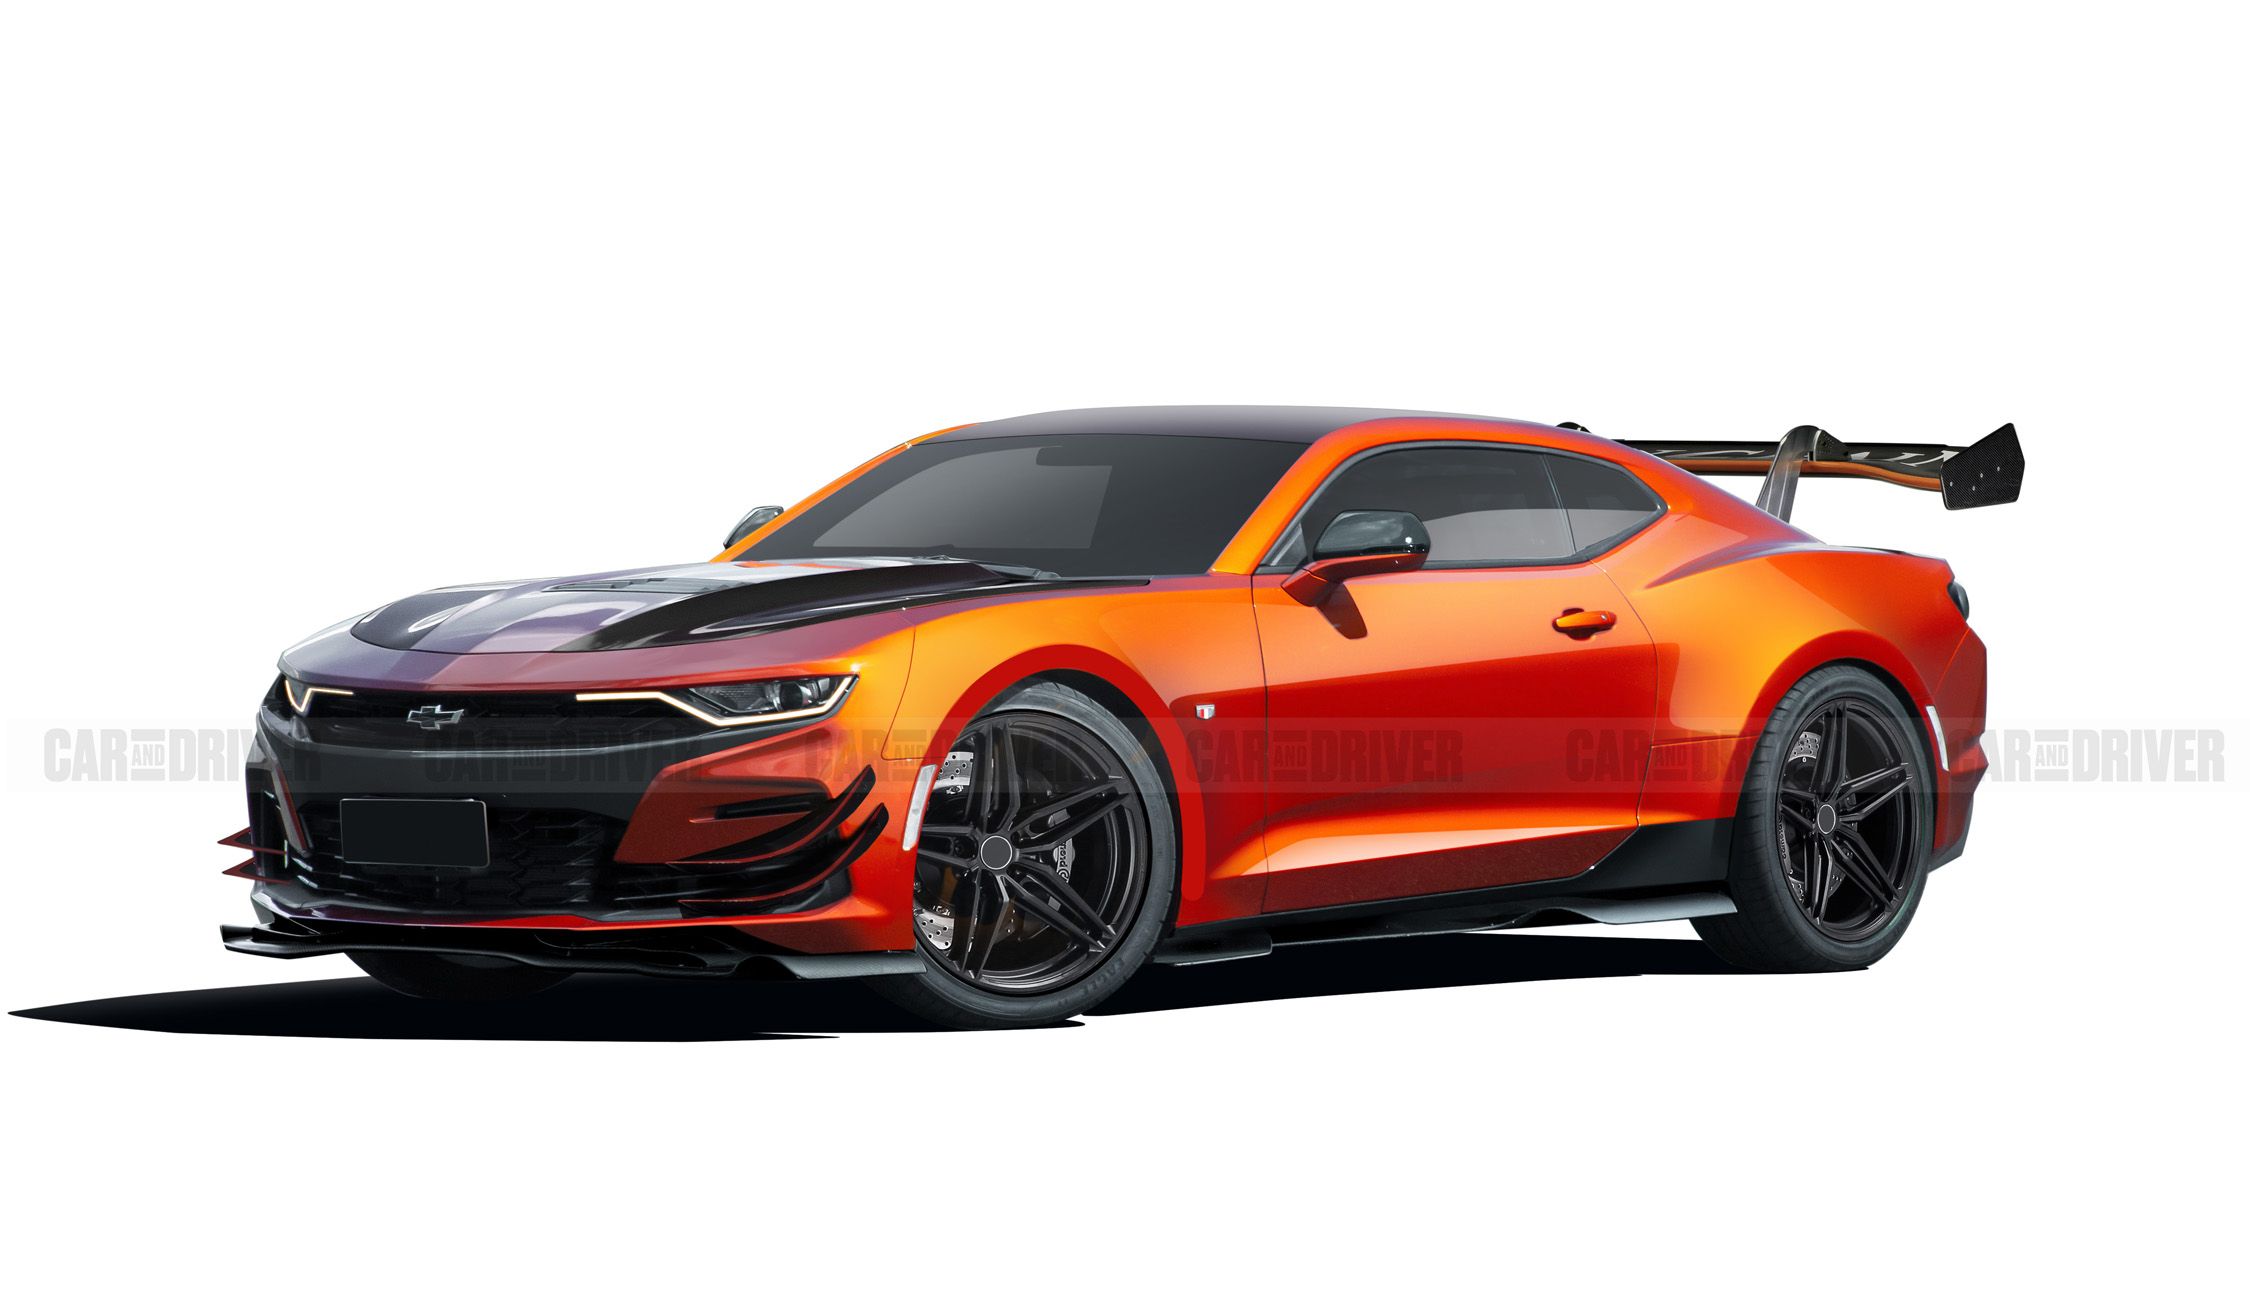 2025 Chevrolet Camaro Z/28 Will Be The Last Of A Legendary Line